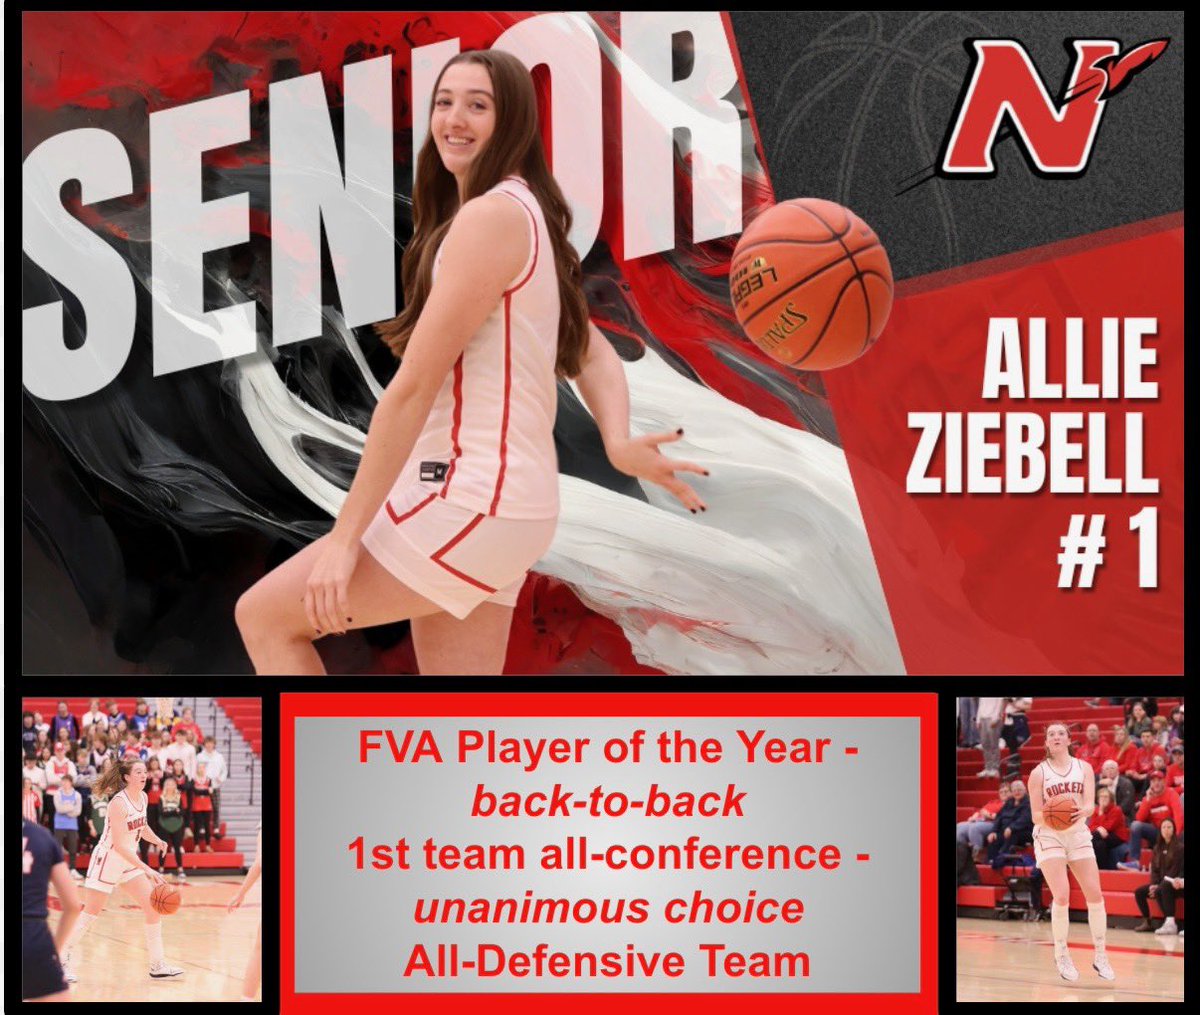 Congratulations to @allieziebell for being named to the FVA All-Defensive team, unanimous 1st team All-FVA and for garnering the FVA Player of the a year for the second consecutive year! #NeenahWithPride